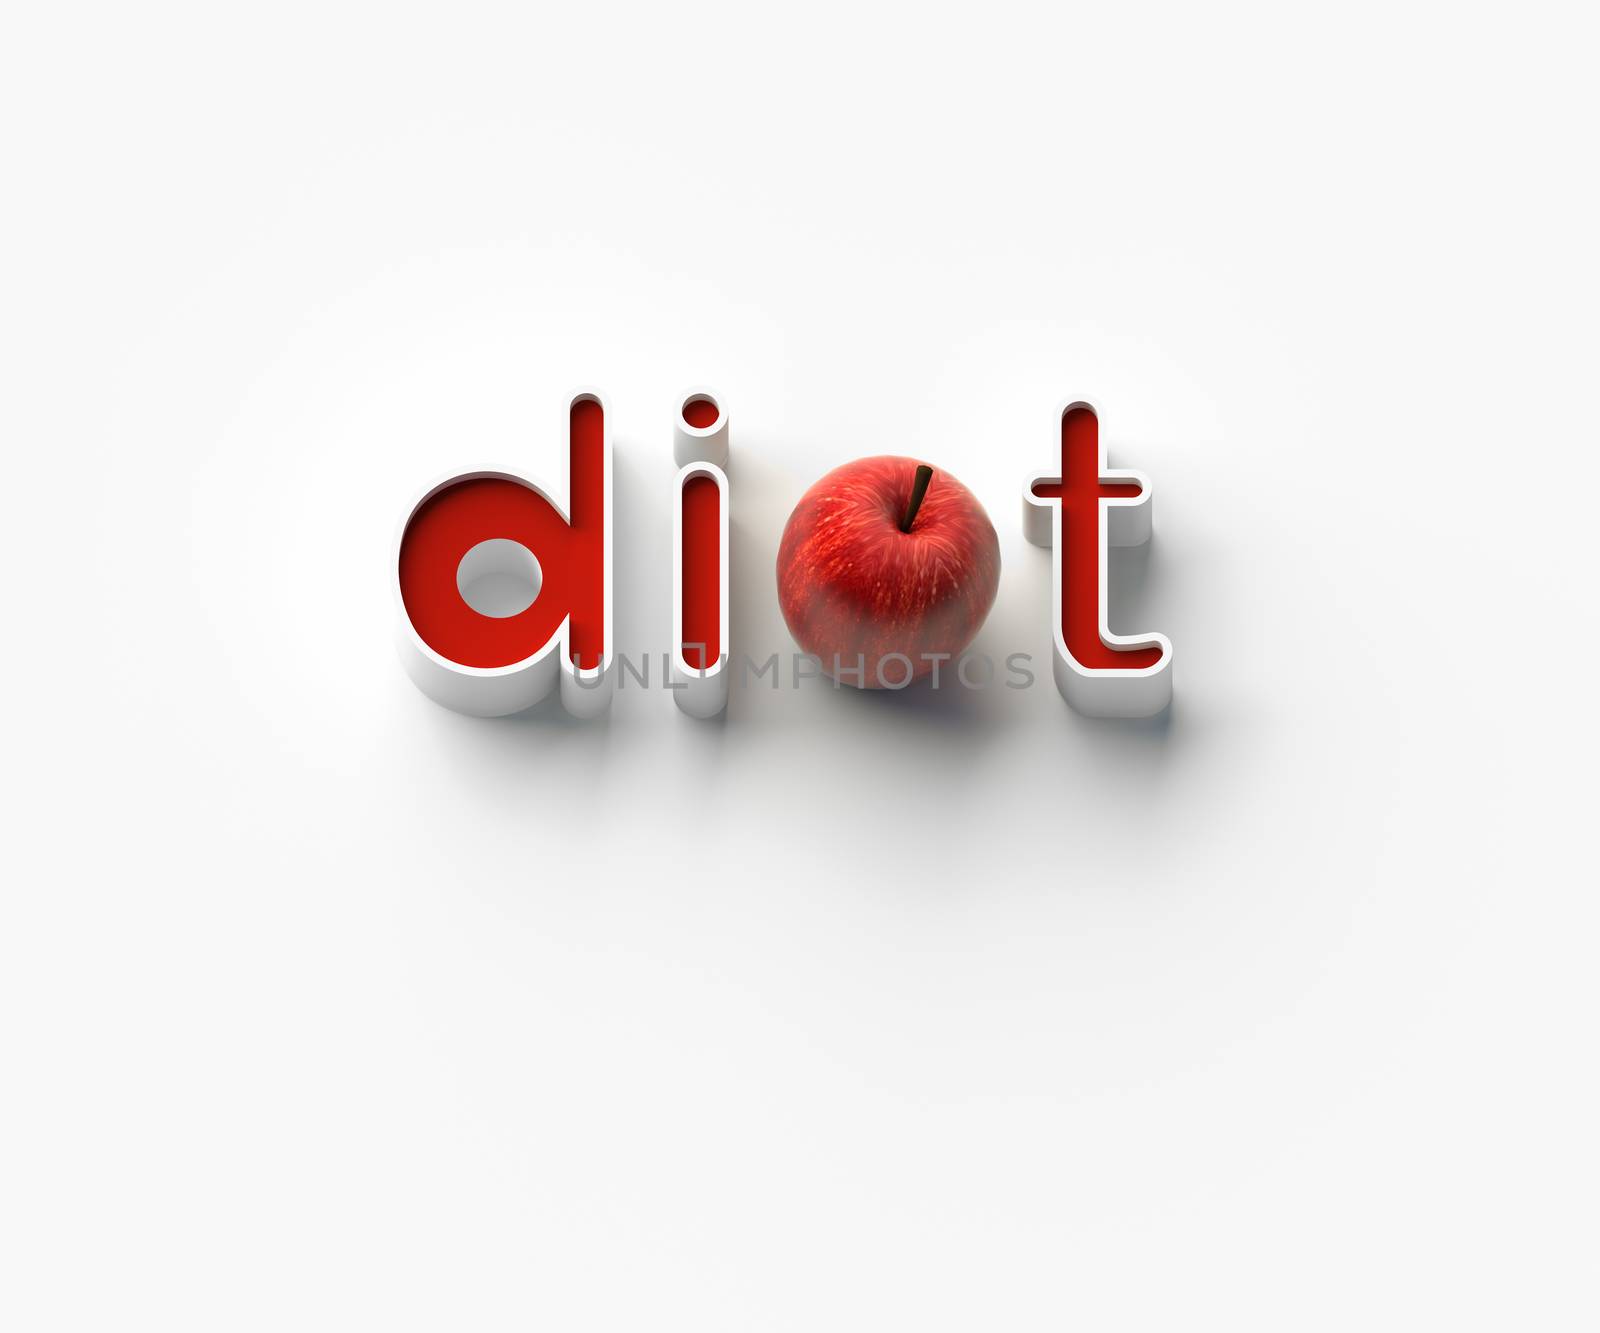 3D RENDERING OF WORDS 'di', AN APPLE AND 't' by PrettyTG